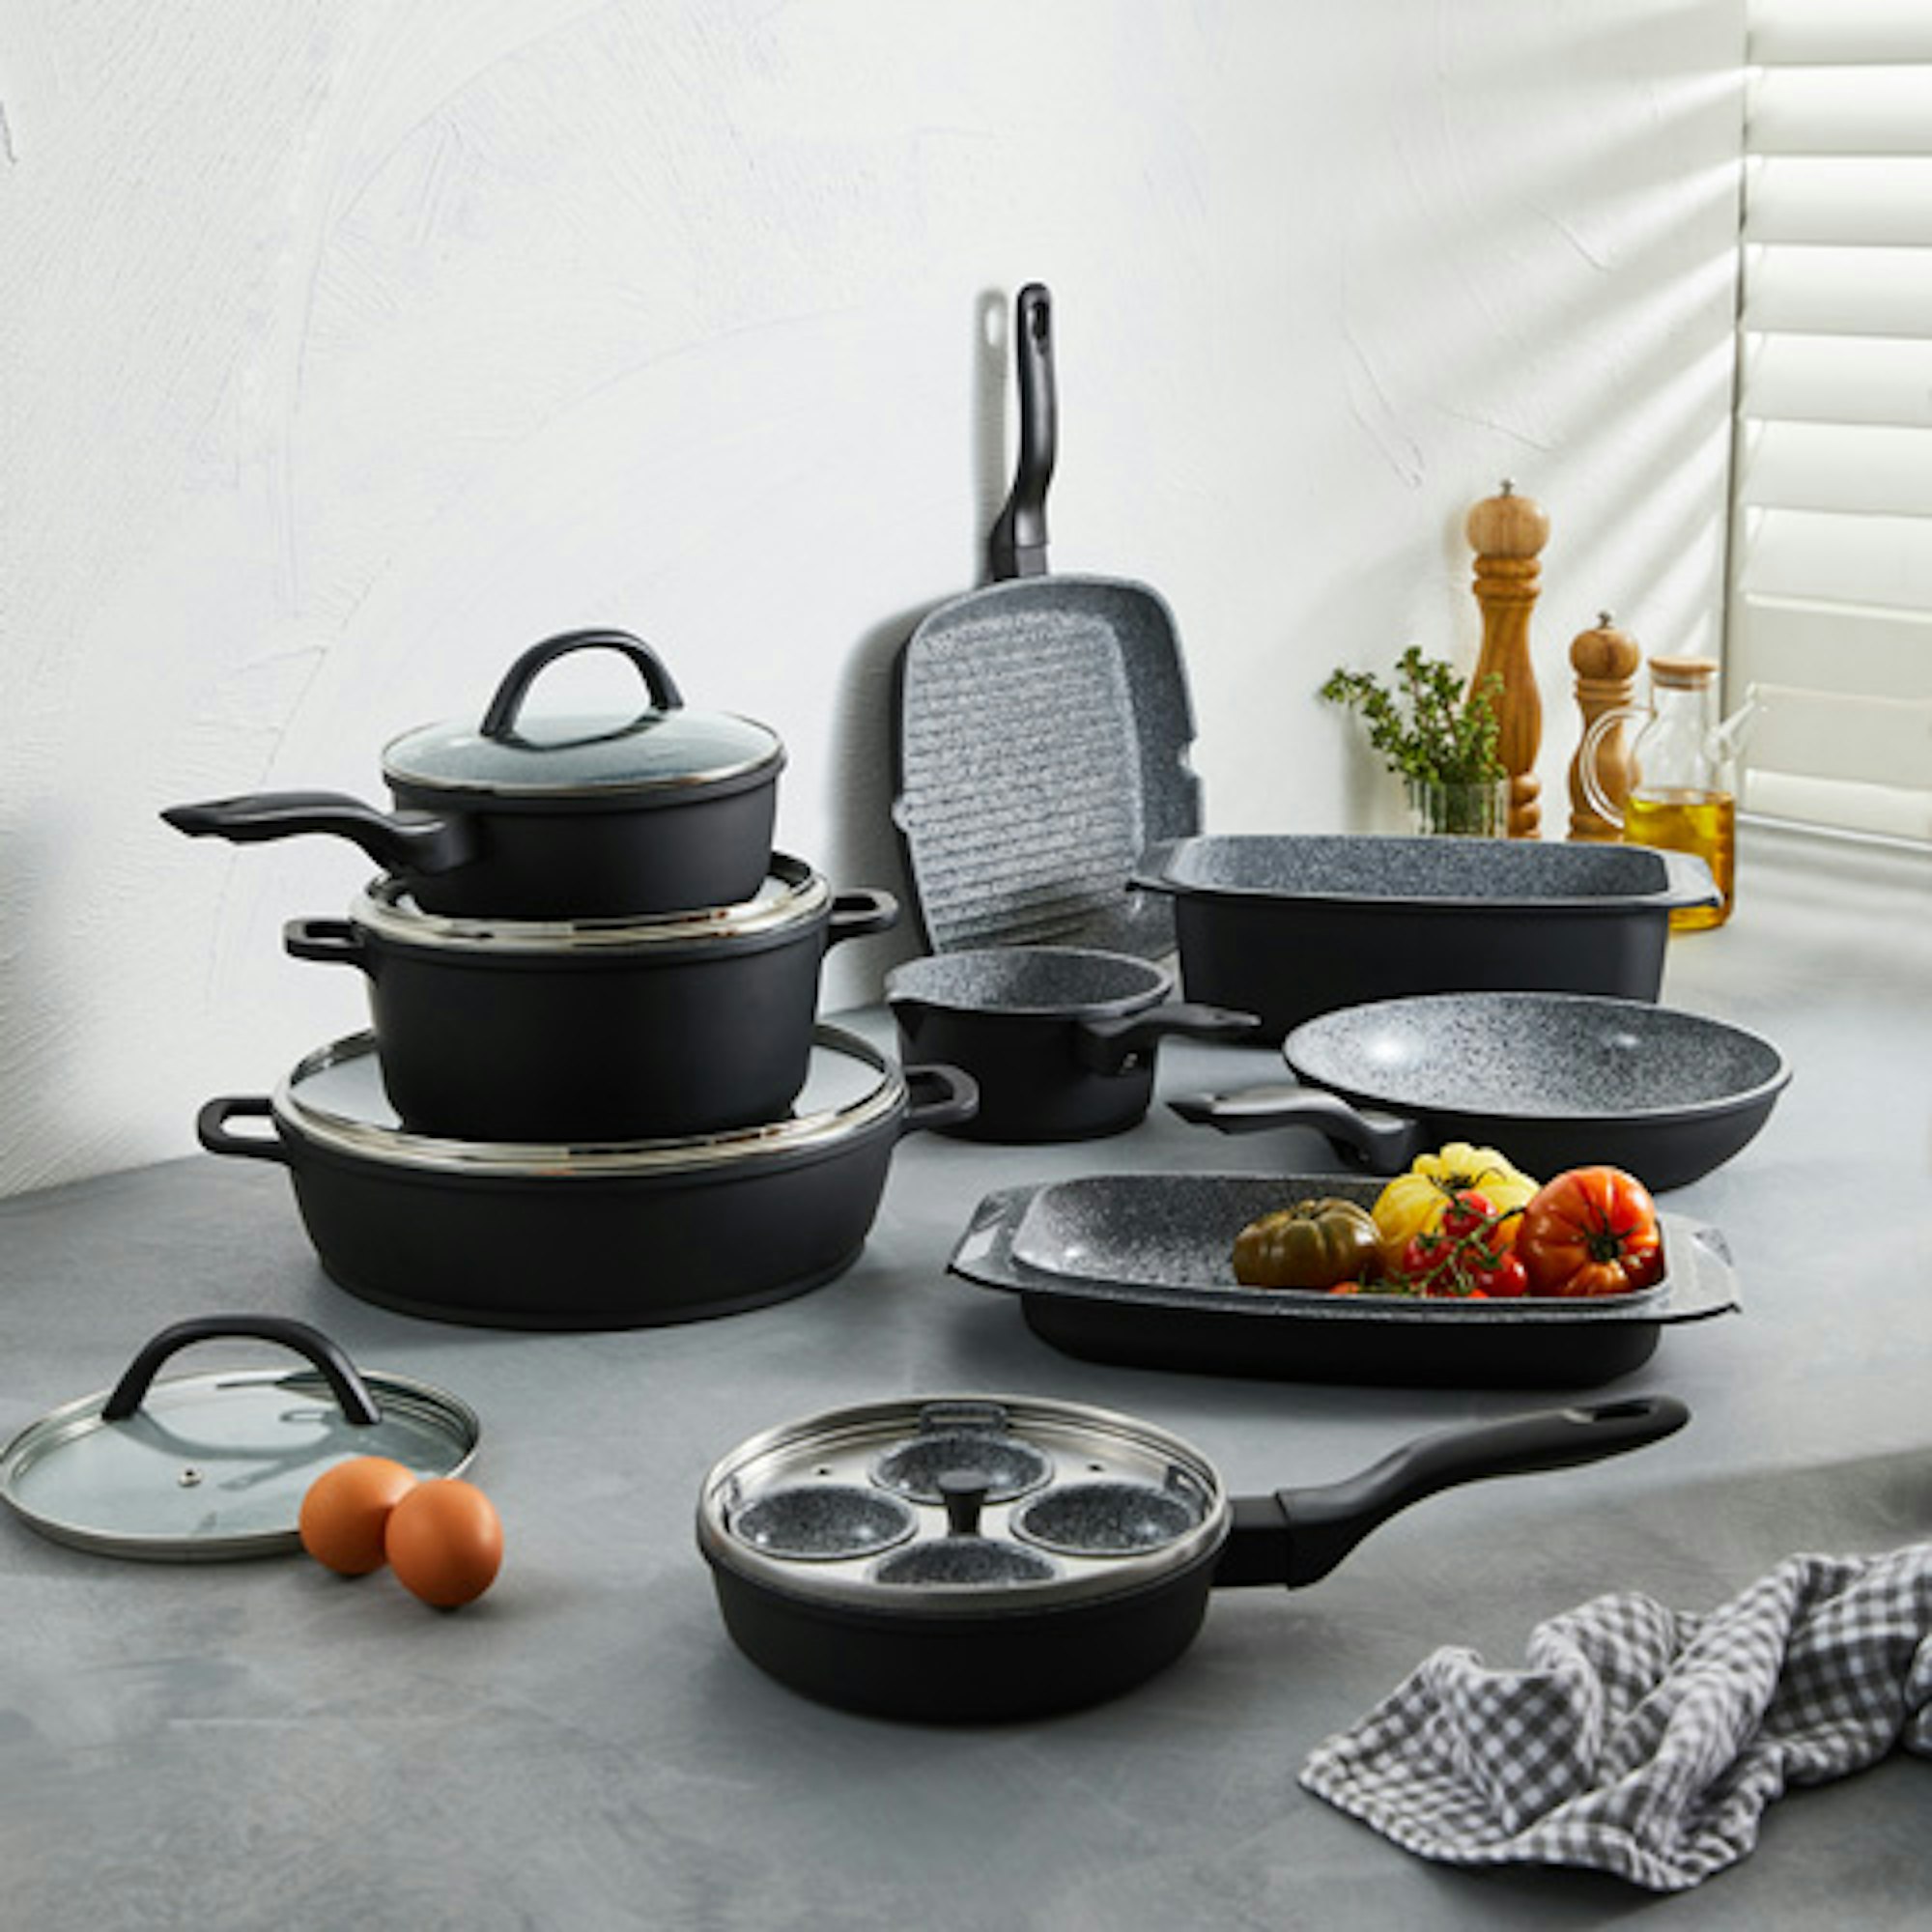 Stone cookware set with egg poacher